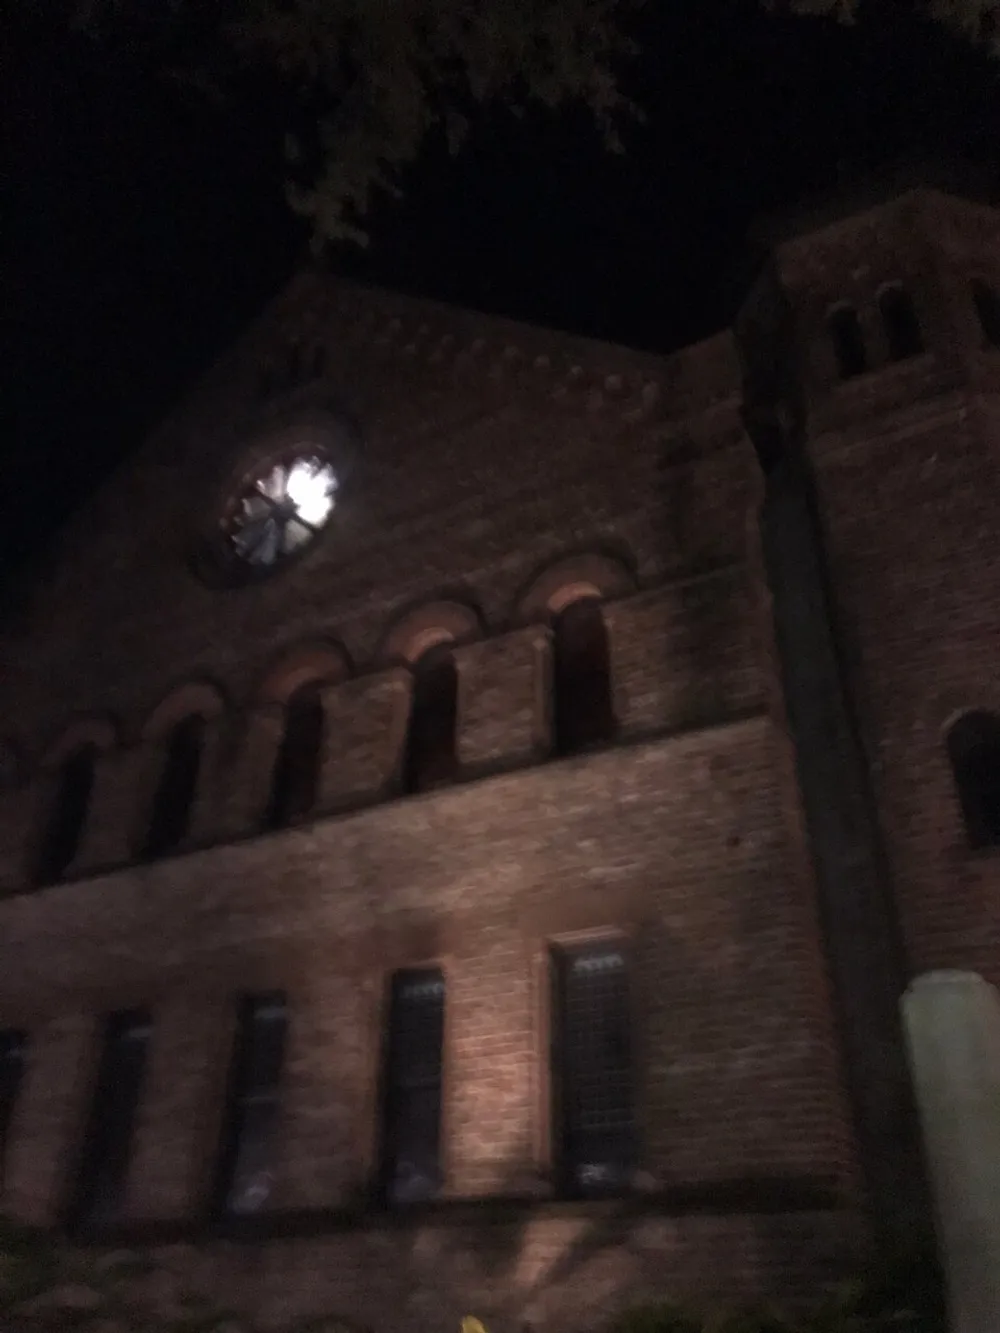 The image shows a dimly lit old brick building at night possibly a church with a blurred effect